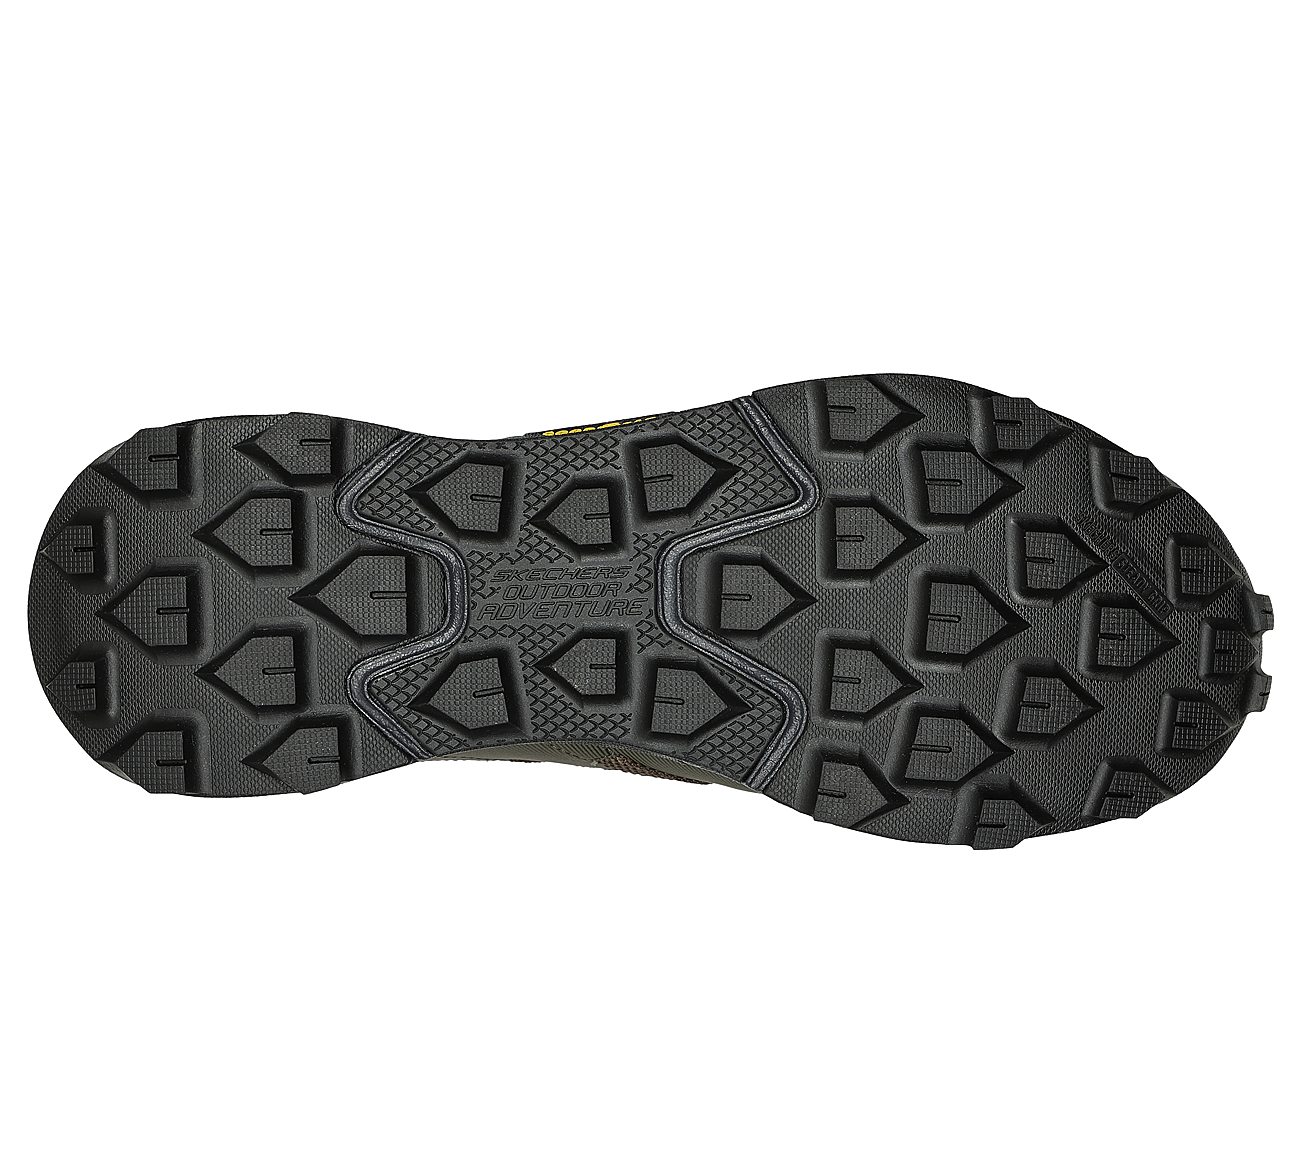 ARCH FIT GLIDE-STEP TRAIL, OLIVE/BLACK Footwear Bottom View